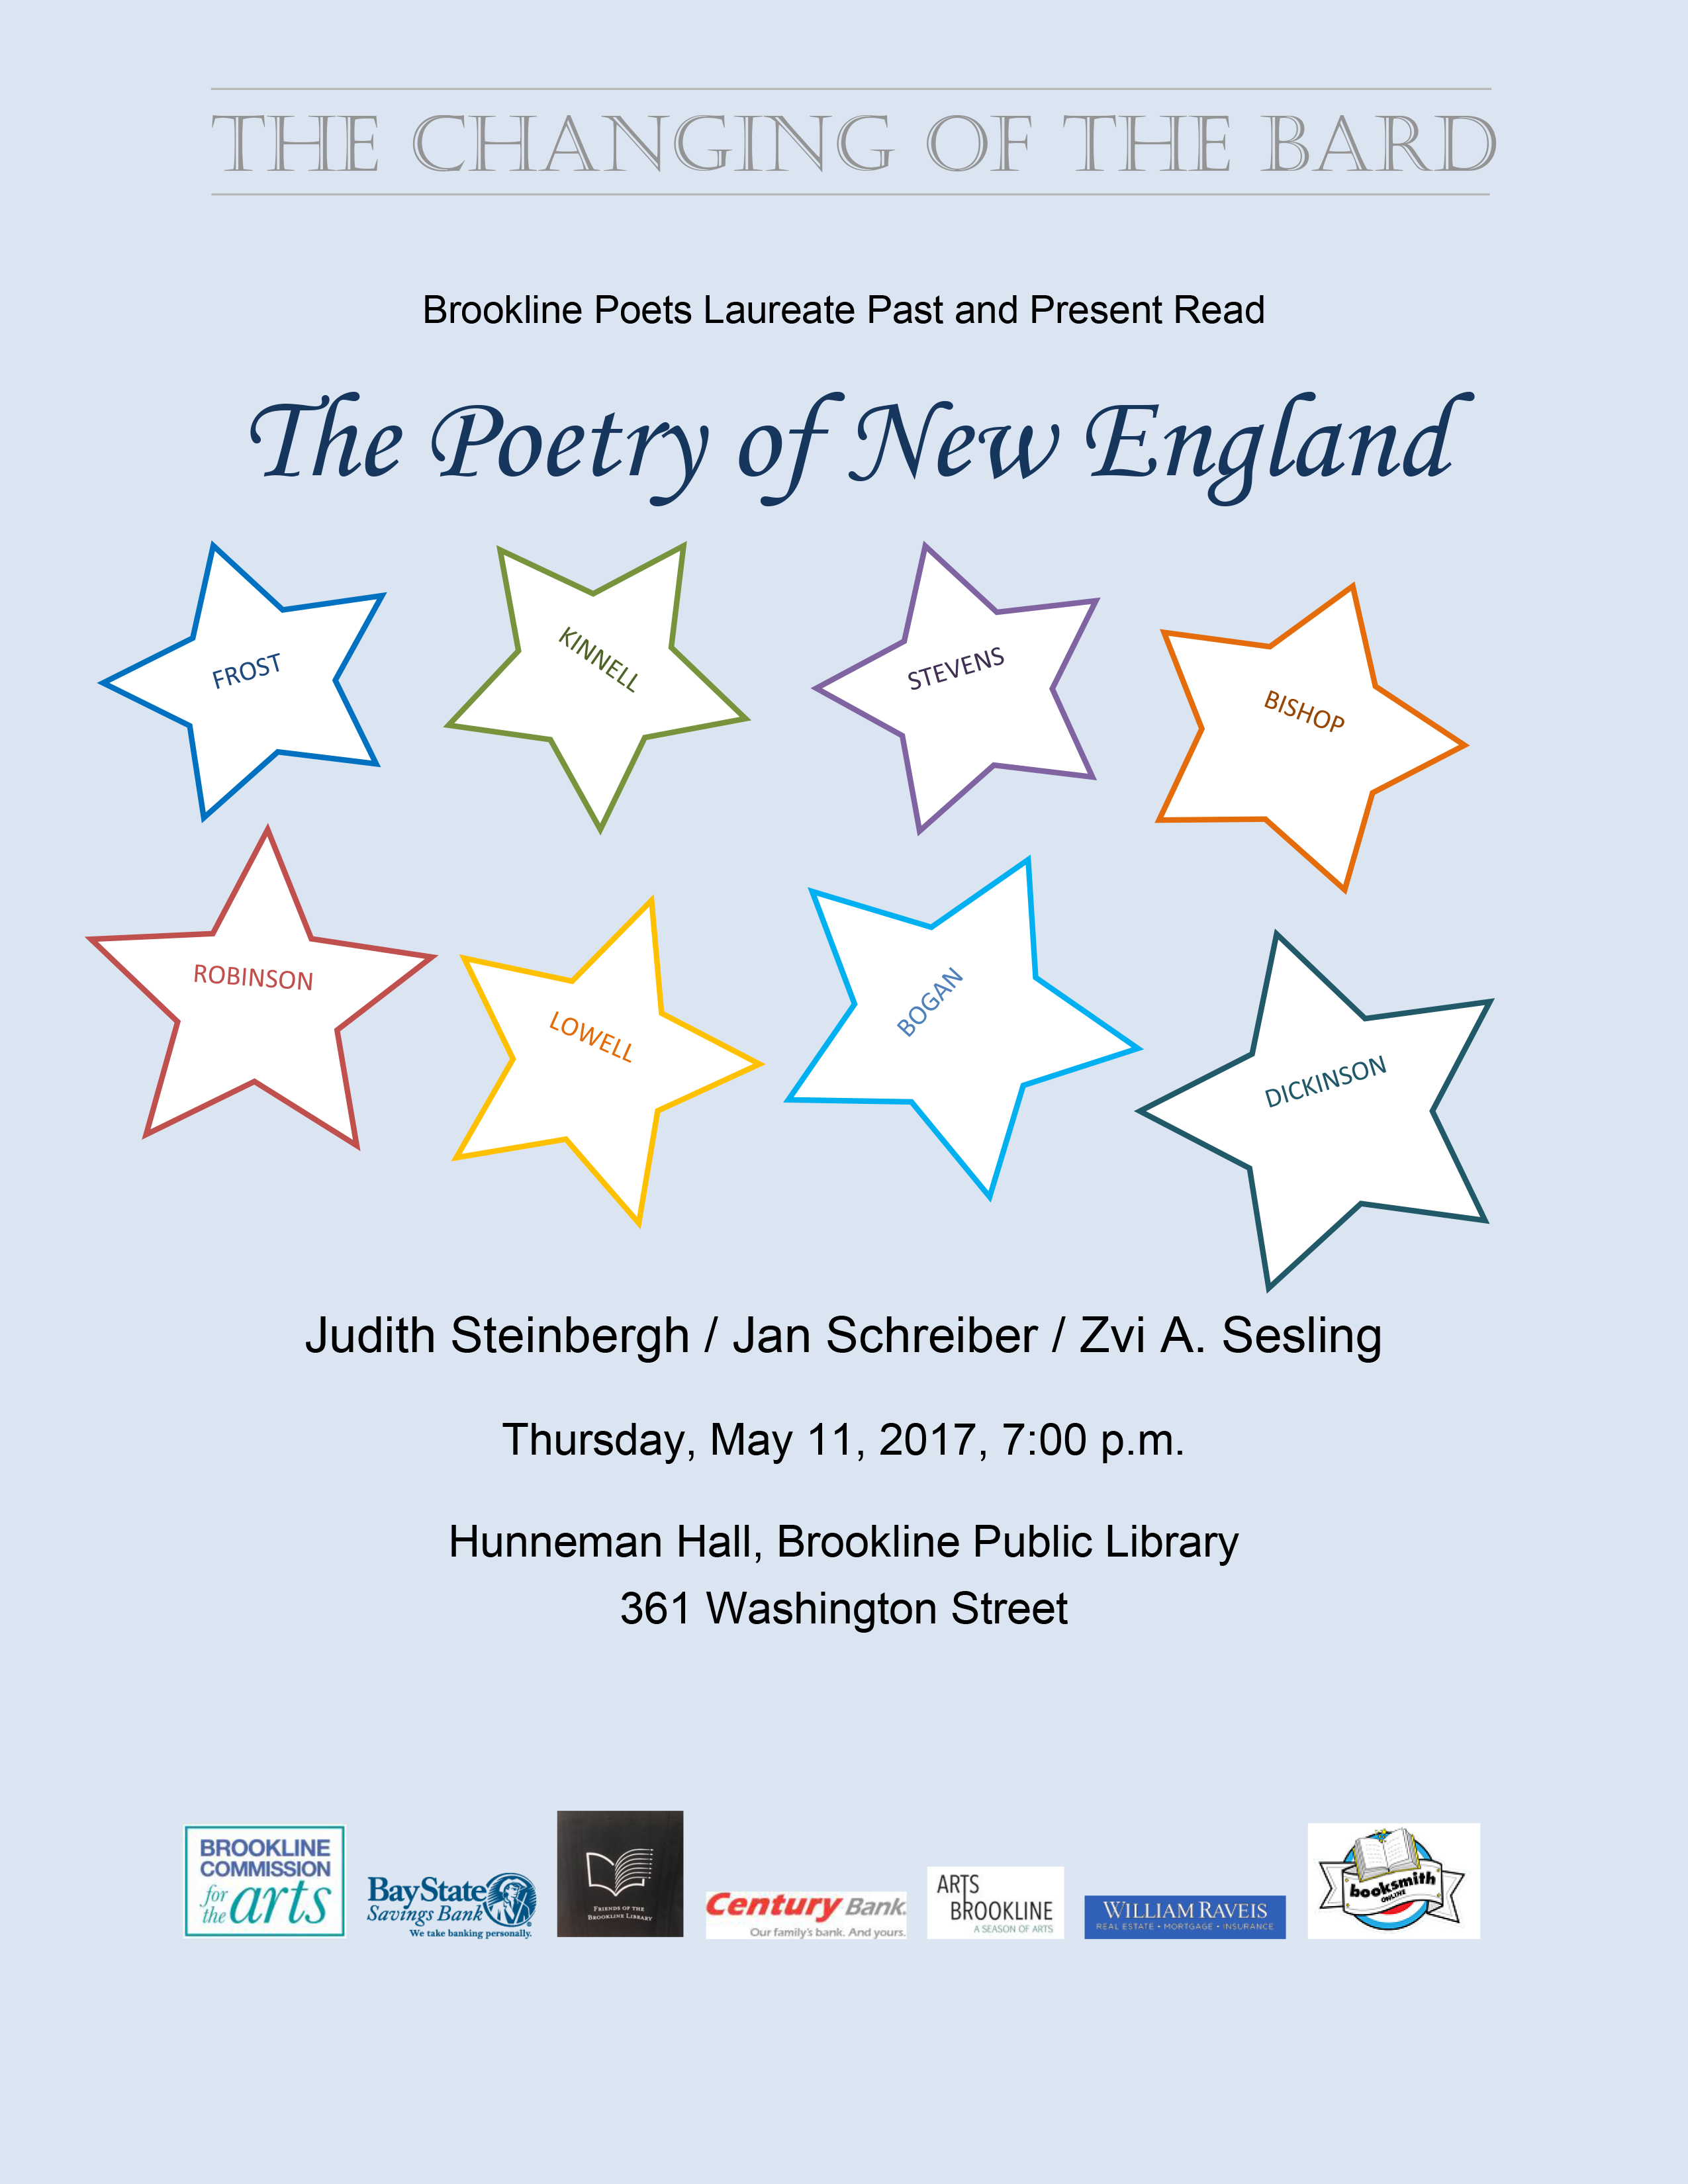 Changing of the Bard: An evening of poetry with Brookline poets laureate past & present Judith Steinbergh, Jan Schreiber and Zvi A Seslin reading The Poetry of New England.